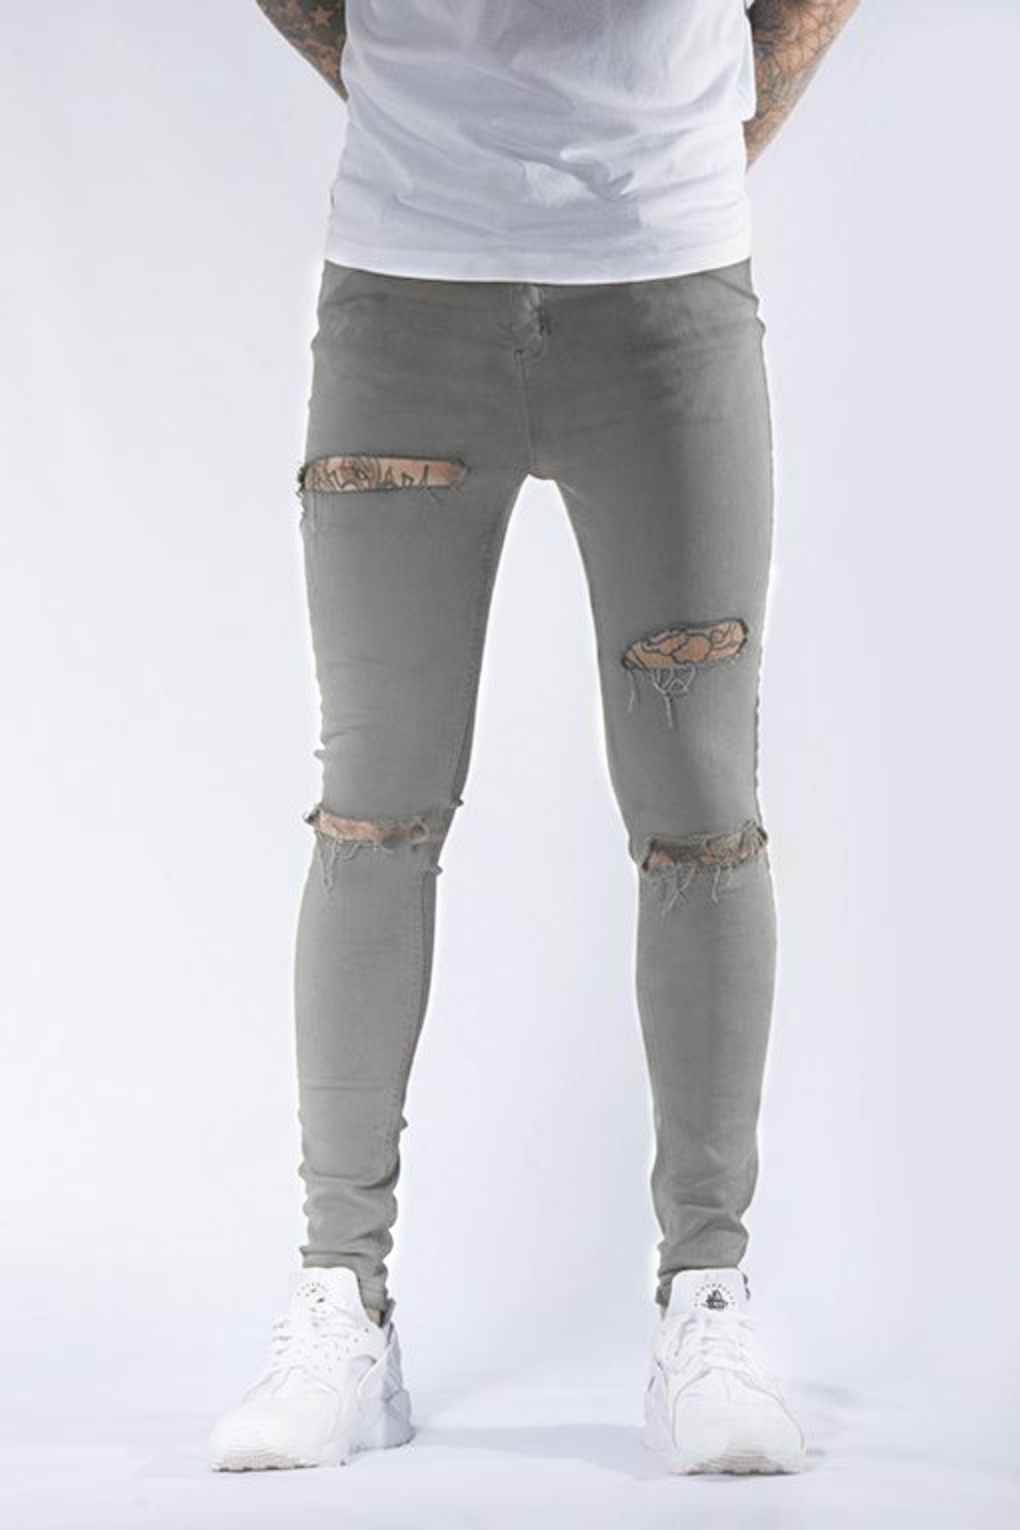 https://empirejeans.co.uk/wp-content/uploads/2021/04/Ice-Grey-Double-Ripped-Super-Skinny-Jeans.jpg